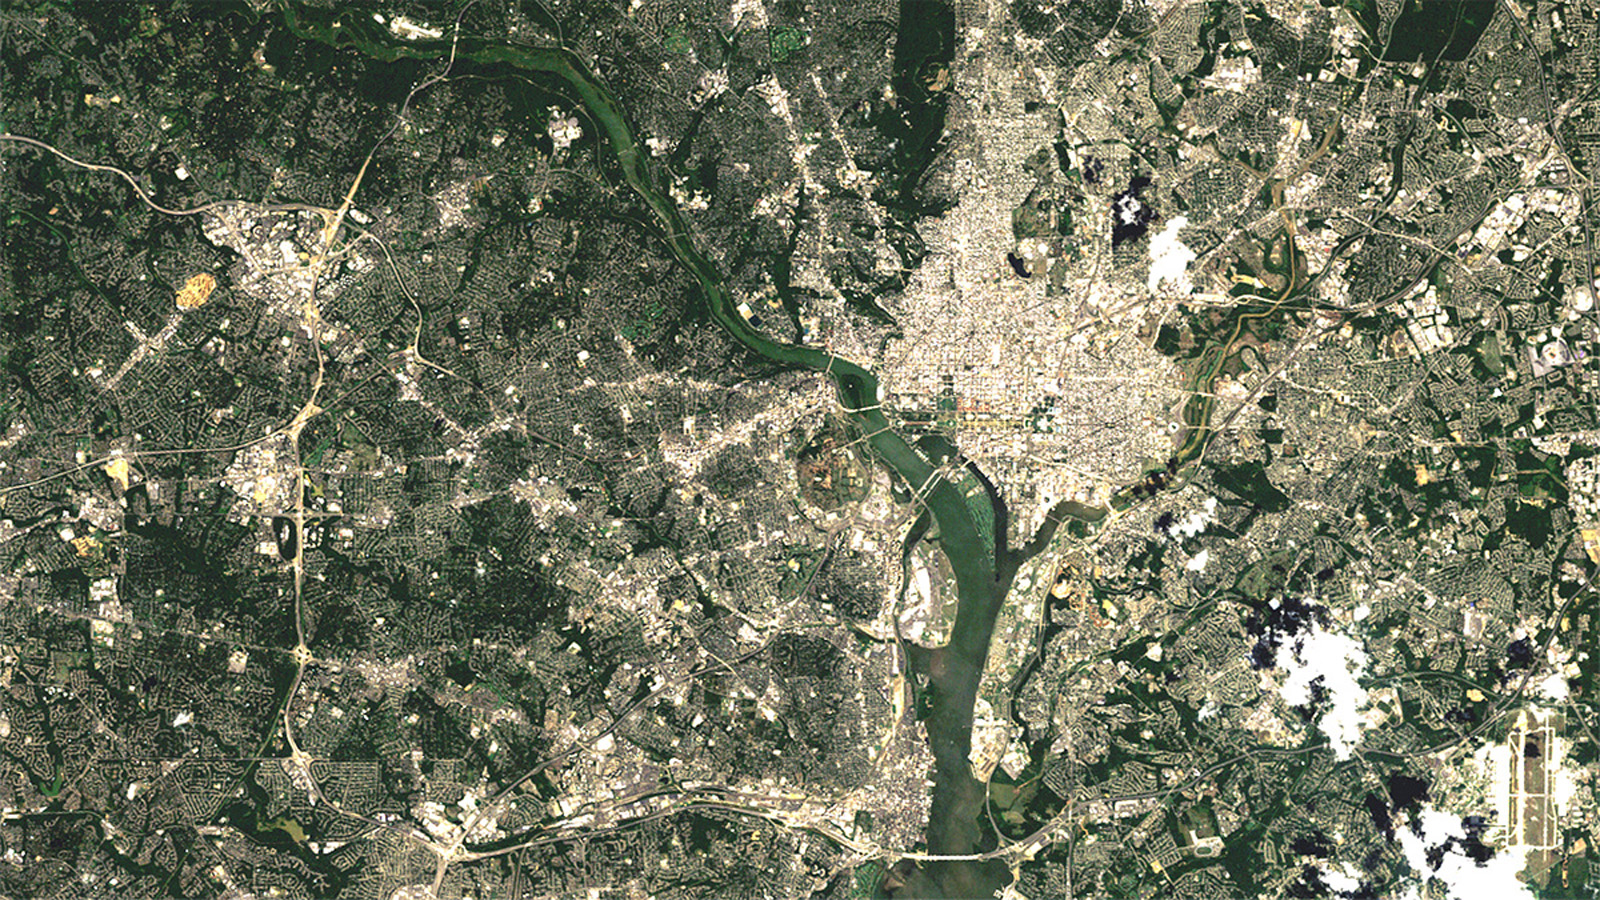 Can You Identify These Cities Based On How They Look From Space?